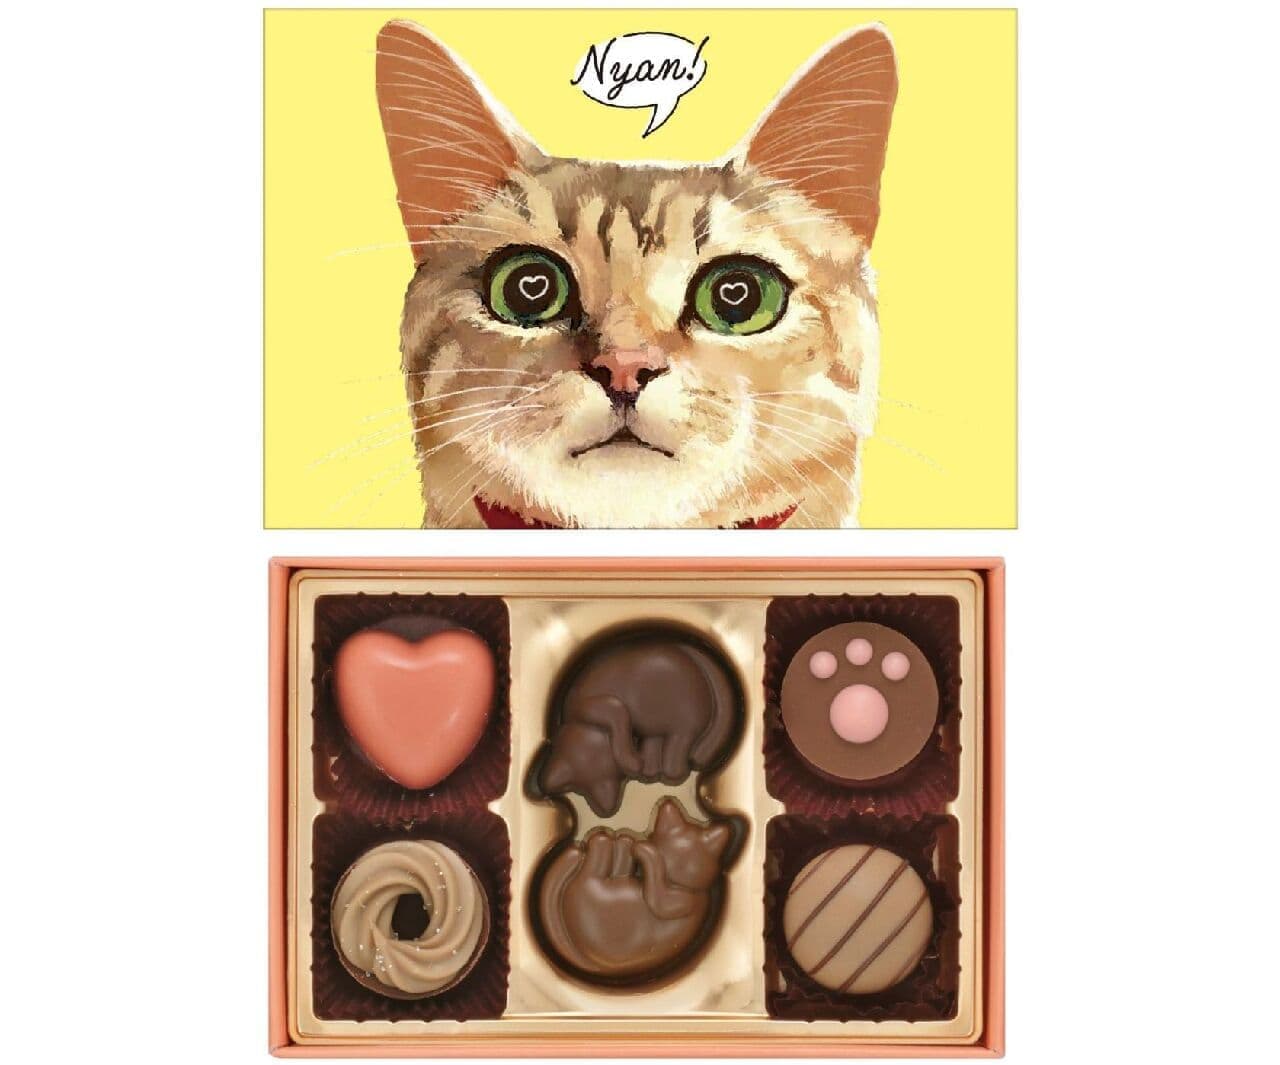 Merry Chocolate "Cat Can" for humans, two kinds of fish-shaped chocolates from new brand "Neko Kyamire